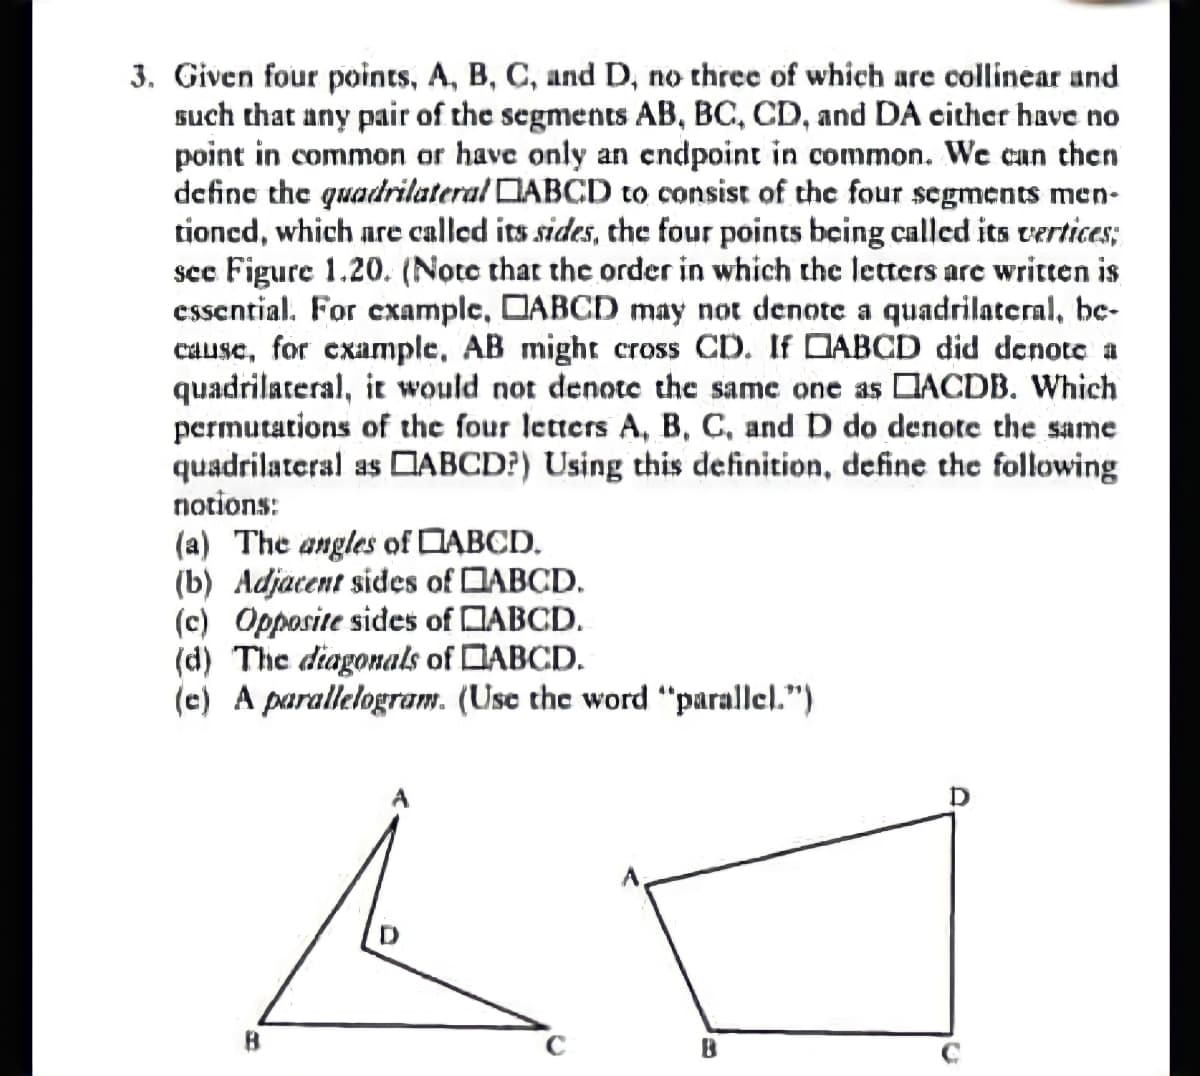 3. Given four points, A, B, C, and D, no three of which are collinear and
such that any pair of the segments AB, BC, CD, and DA cither have no
point in common or have only an endpoint in common. We can then
define the quadrilateral DABCD to consist of thc four segments men-
tioned, which are called its sides, the four points being called its vertices;
see Figure 1.20. (Note that the order in which the letters are written is
essential. For example, DABCD may not denote a quadrilateral, bc-
cause, for example, AB mighr cross CD. If DABCD did denote a
quadrilateral, it would not denote the same one as DACDB. Which
permutations of the four letters A, B, C, and D do denote the same
quadrilateral as DABCD?) Using this definition, define the following
notions:
(a) The angles of DABCD.
(b) Adjacent sides of DABCD.
(c) Opposite sides of DABCD.
(d) The diagonals of DABCD.
(e) A parallelogram. (Use the word "parallel.")
B
